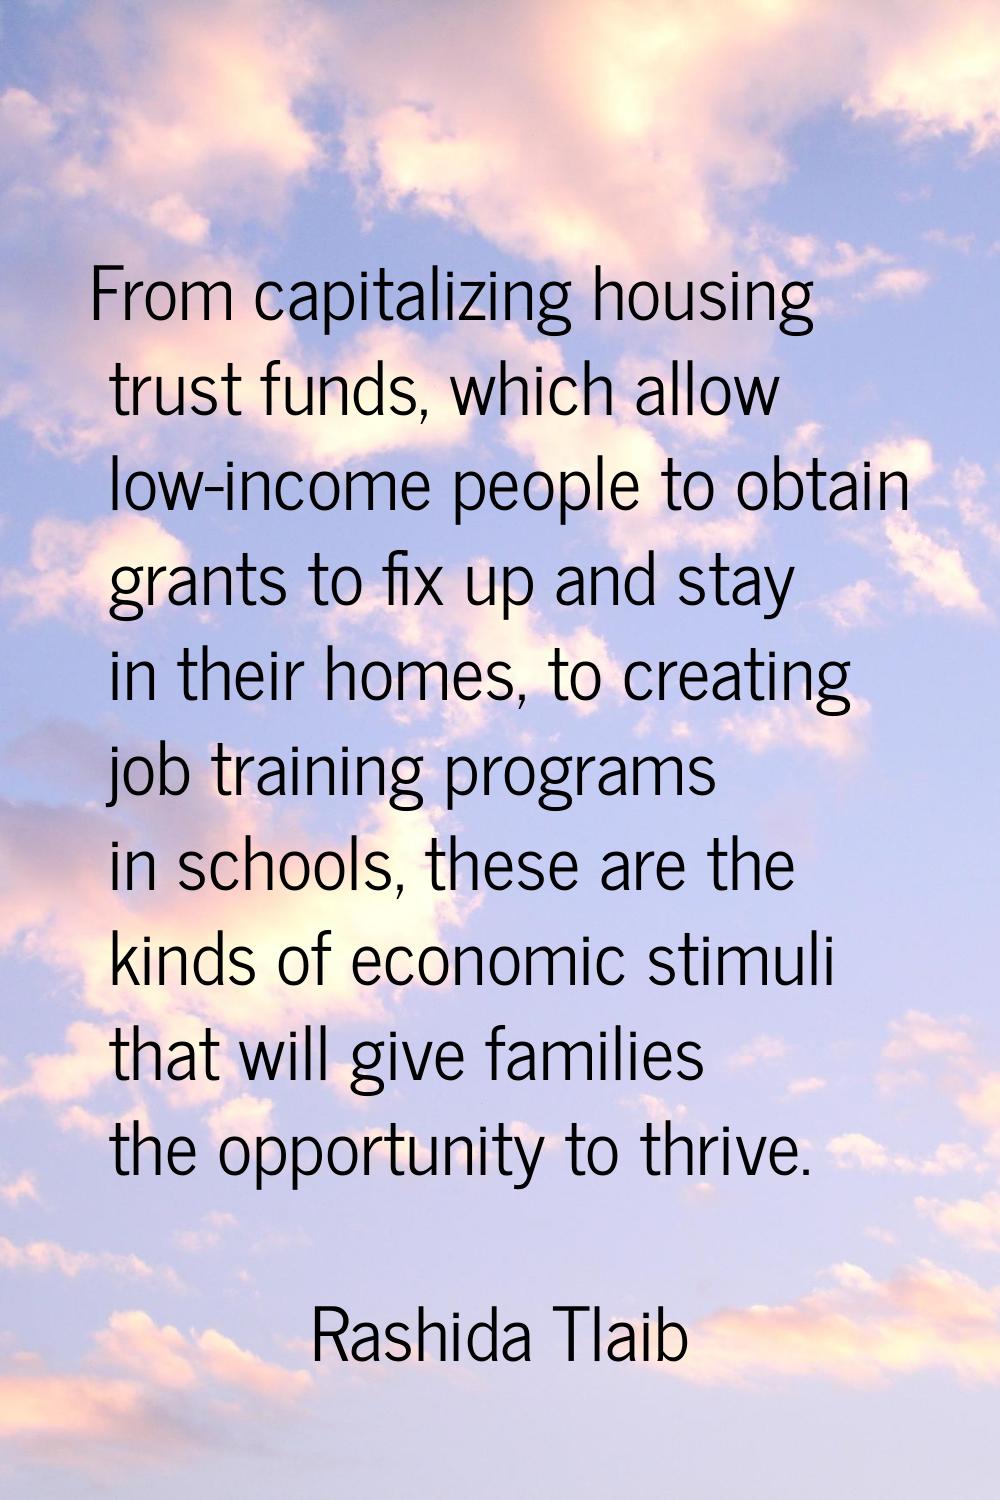 From capitalizing housing trust funds, which allow low-income people to obtain grants to fix up and